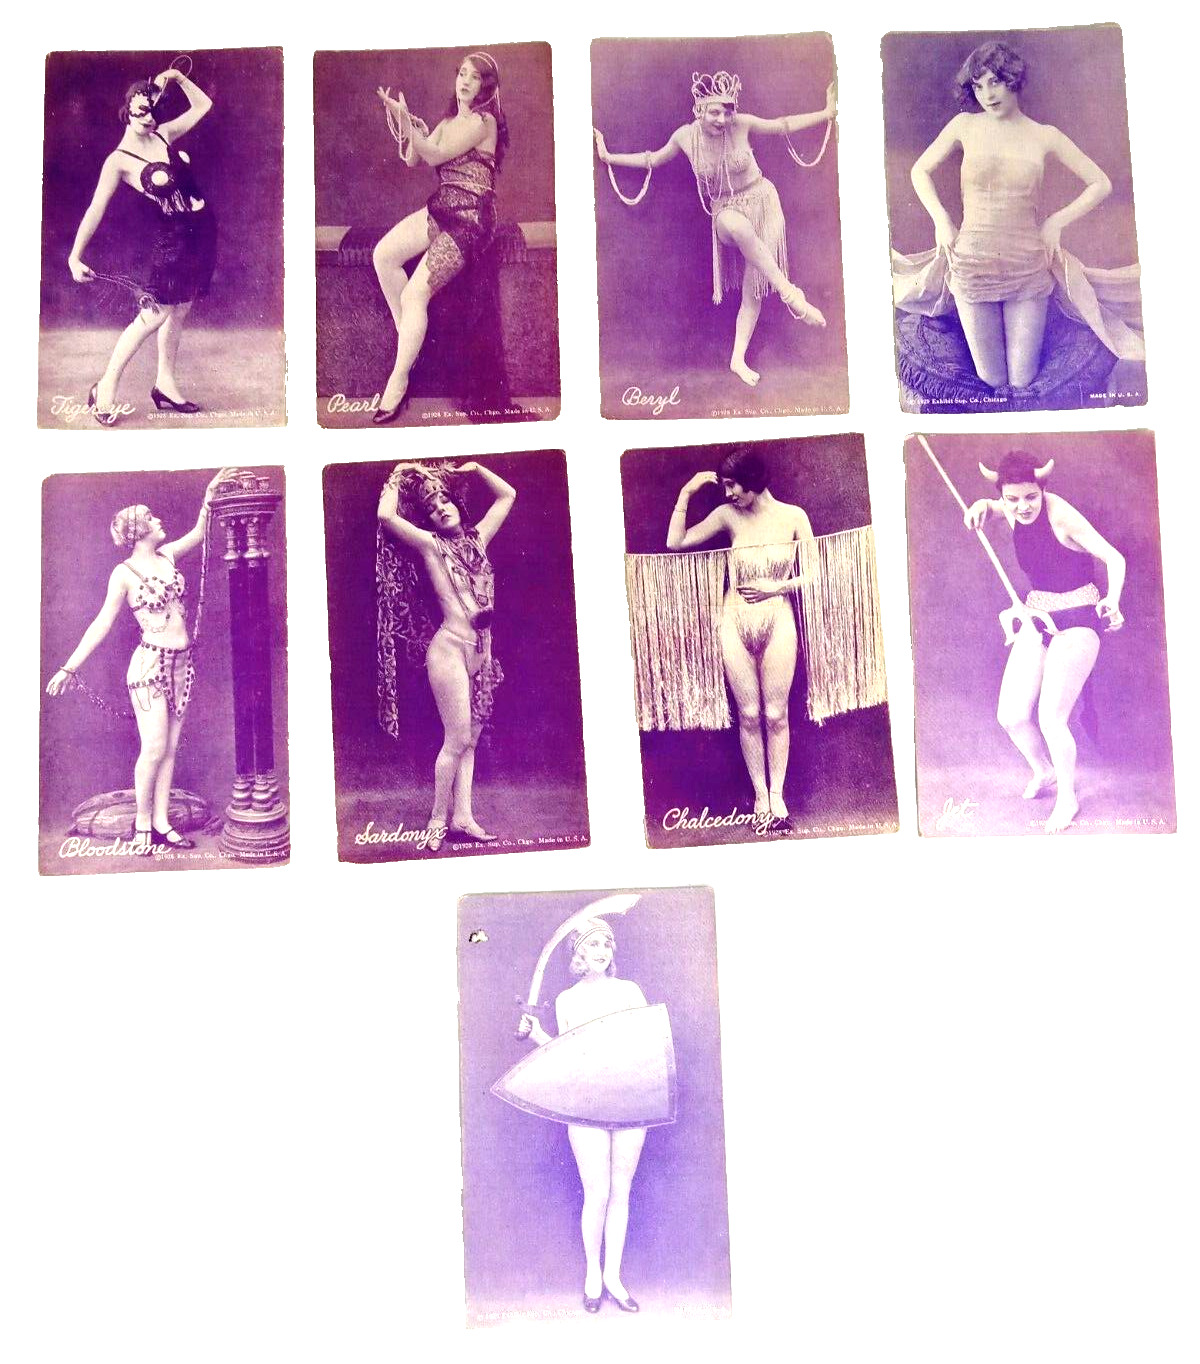 1920\'s Exhibit Supply Co. Risque Pin-Up Arcade Photo Cards Roaring 20\'s Flapper